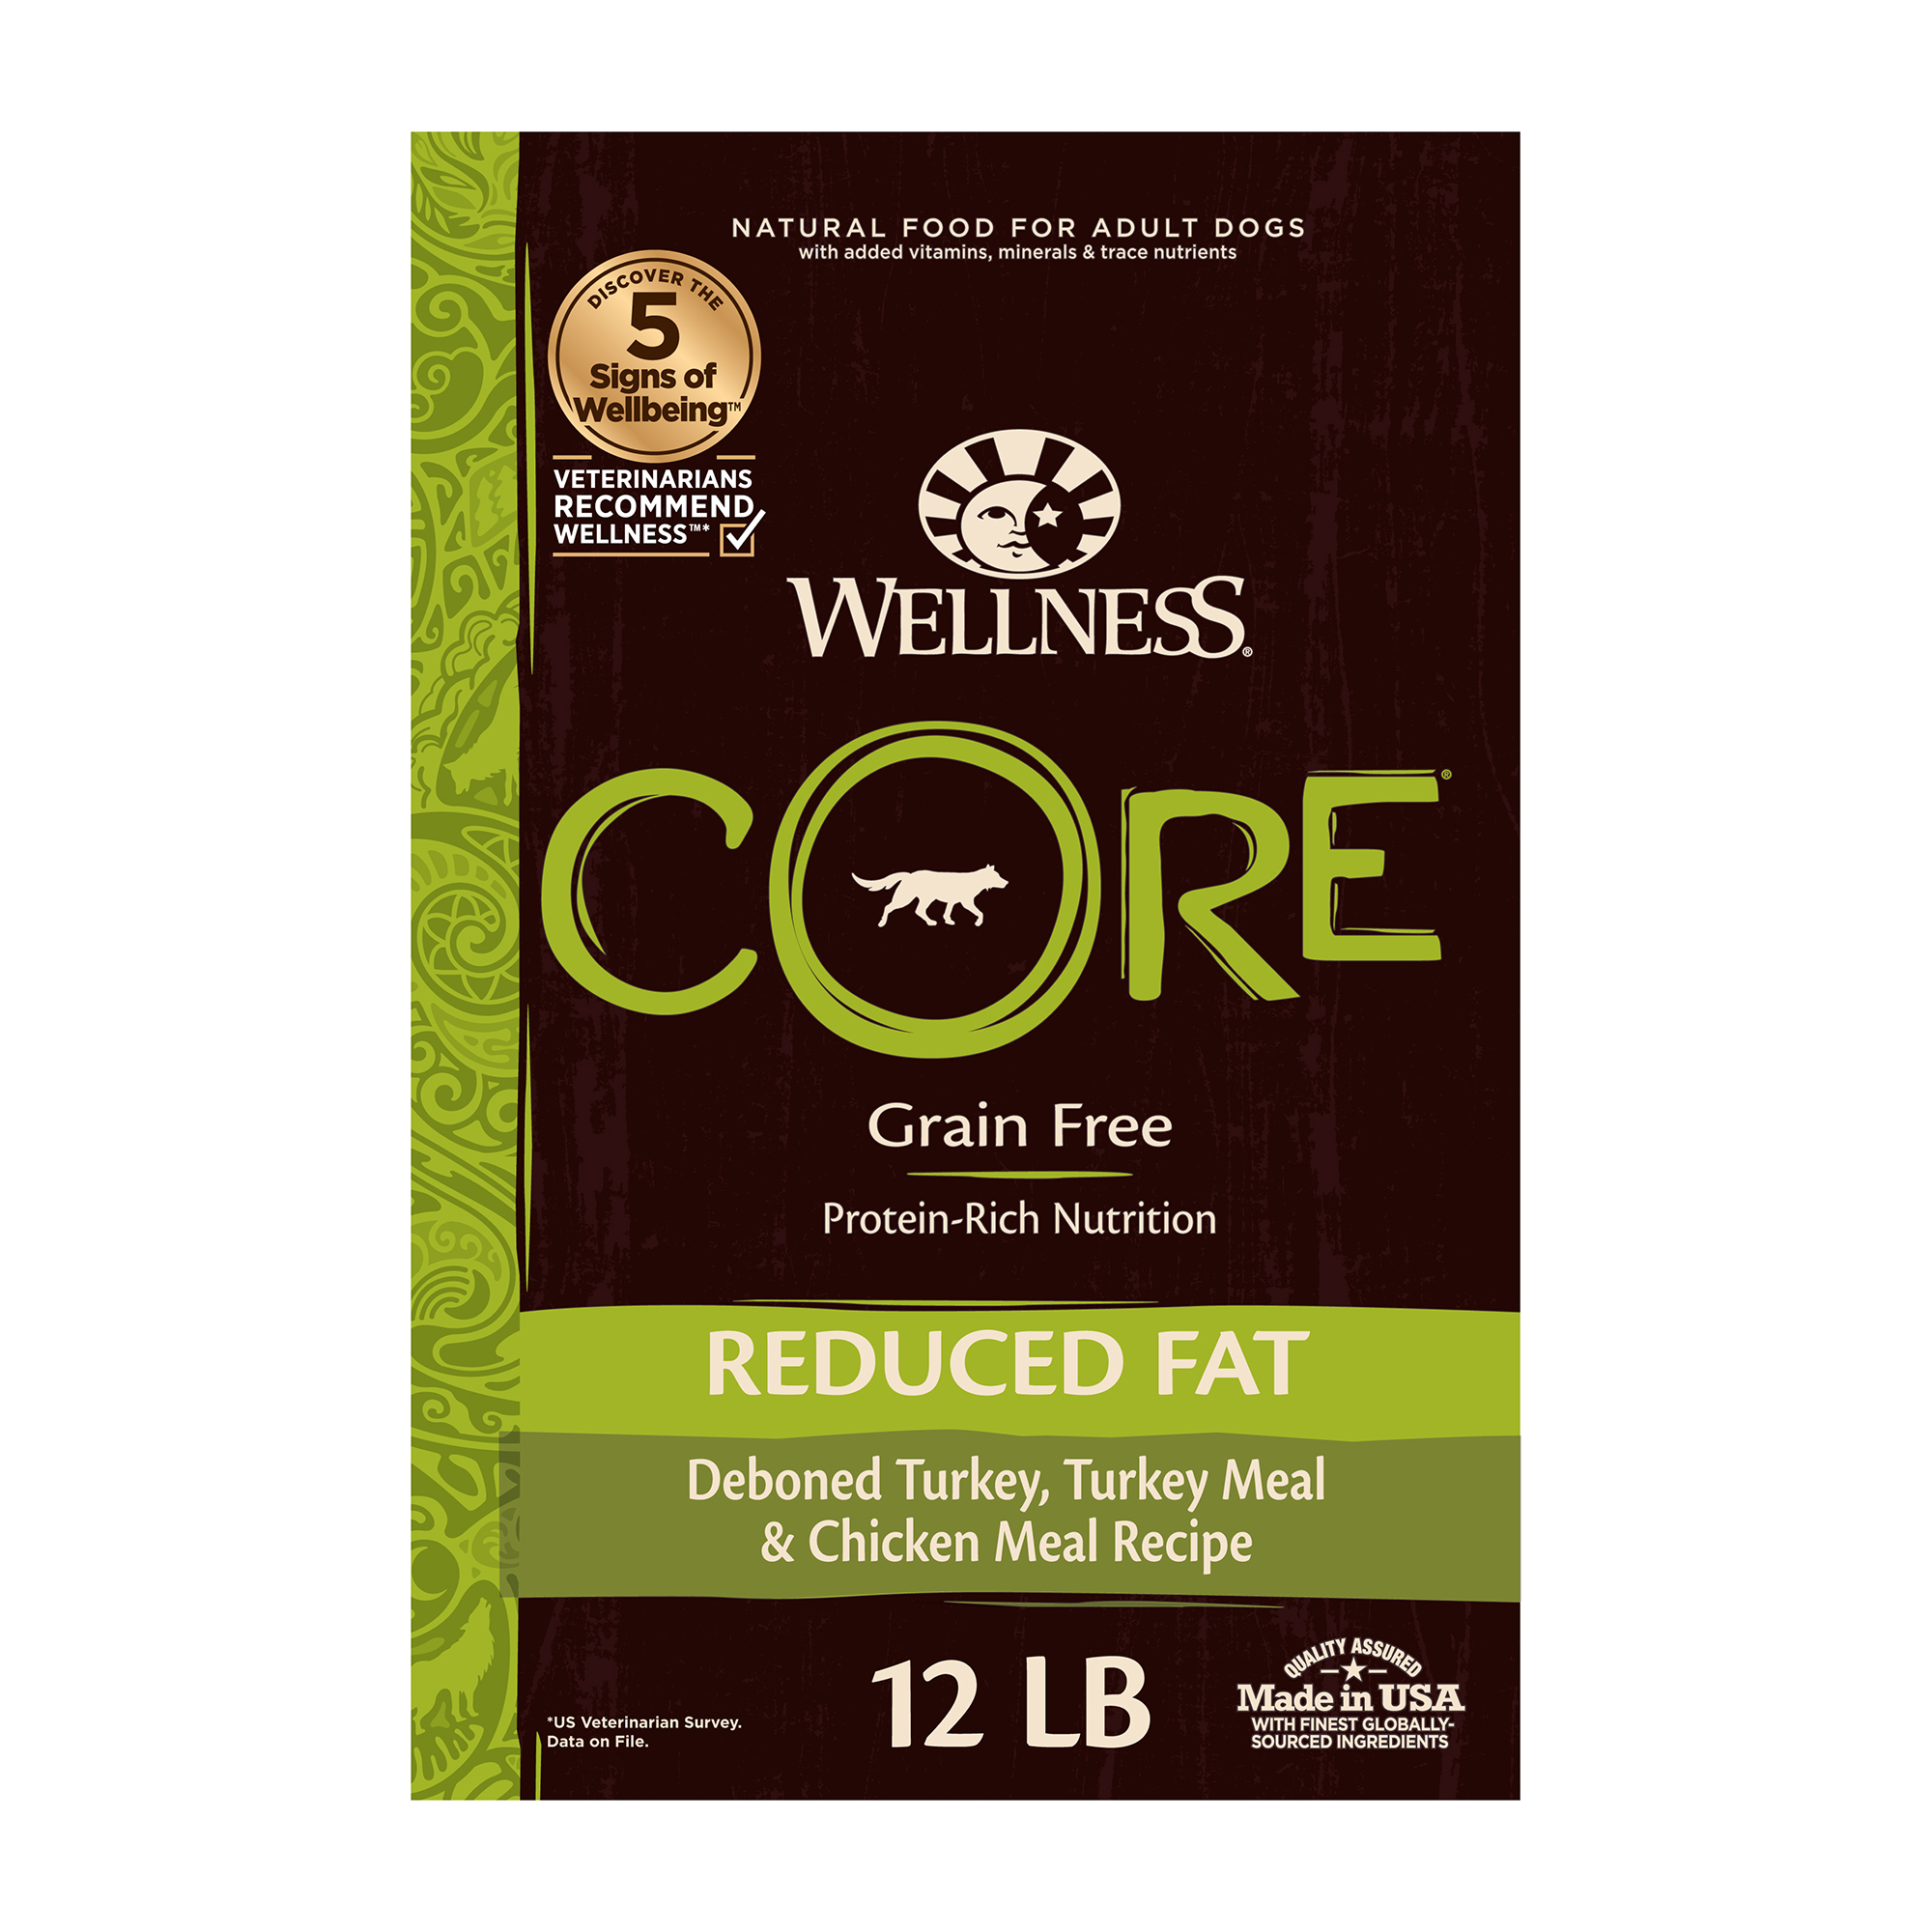 Wellness CORE Natural Grain Free Dry Dog Food, Reduced Fat Recipe, 12-Pound Bag - image 1 of 8